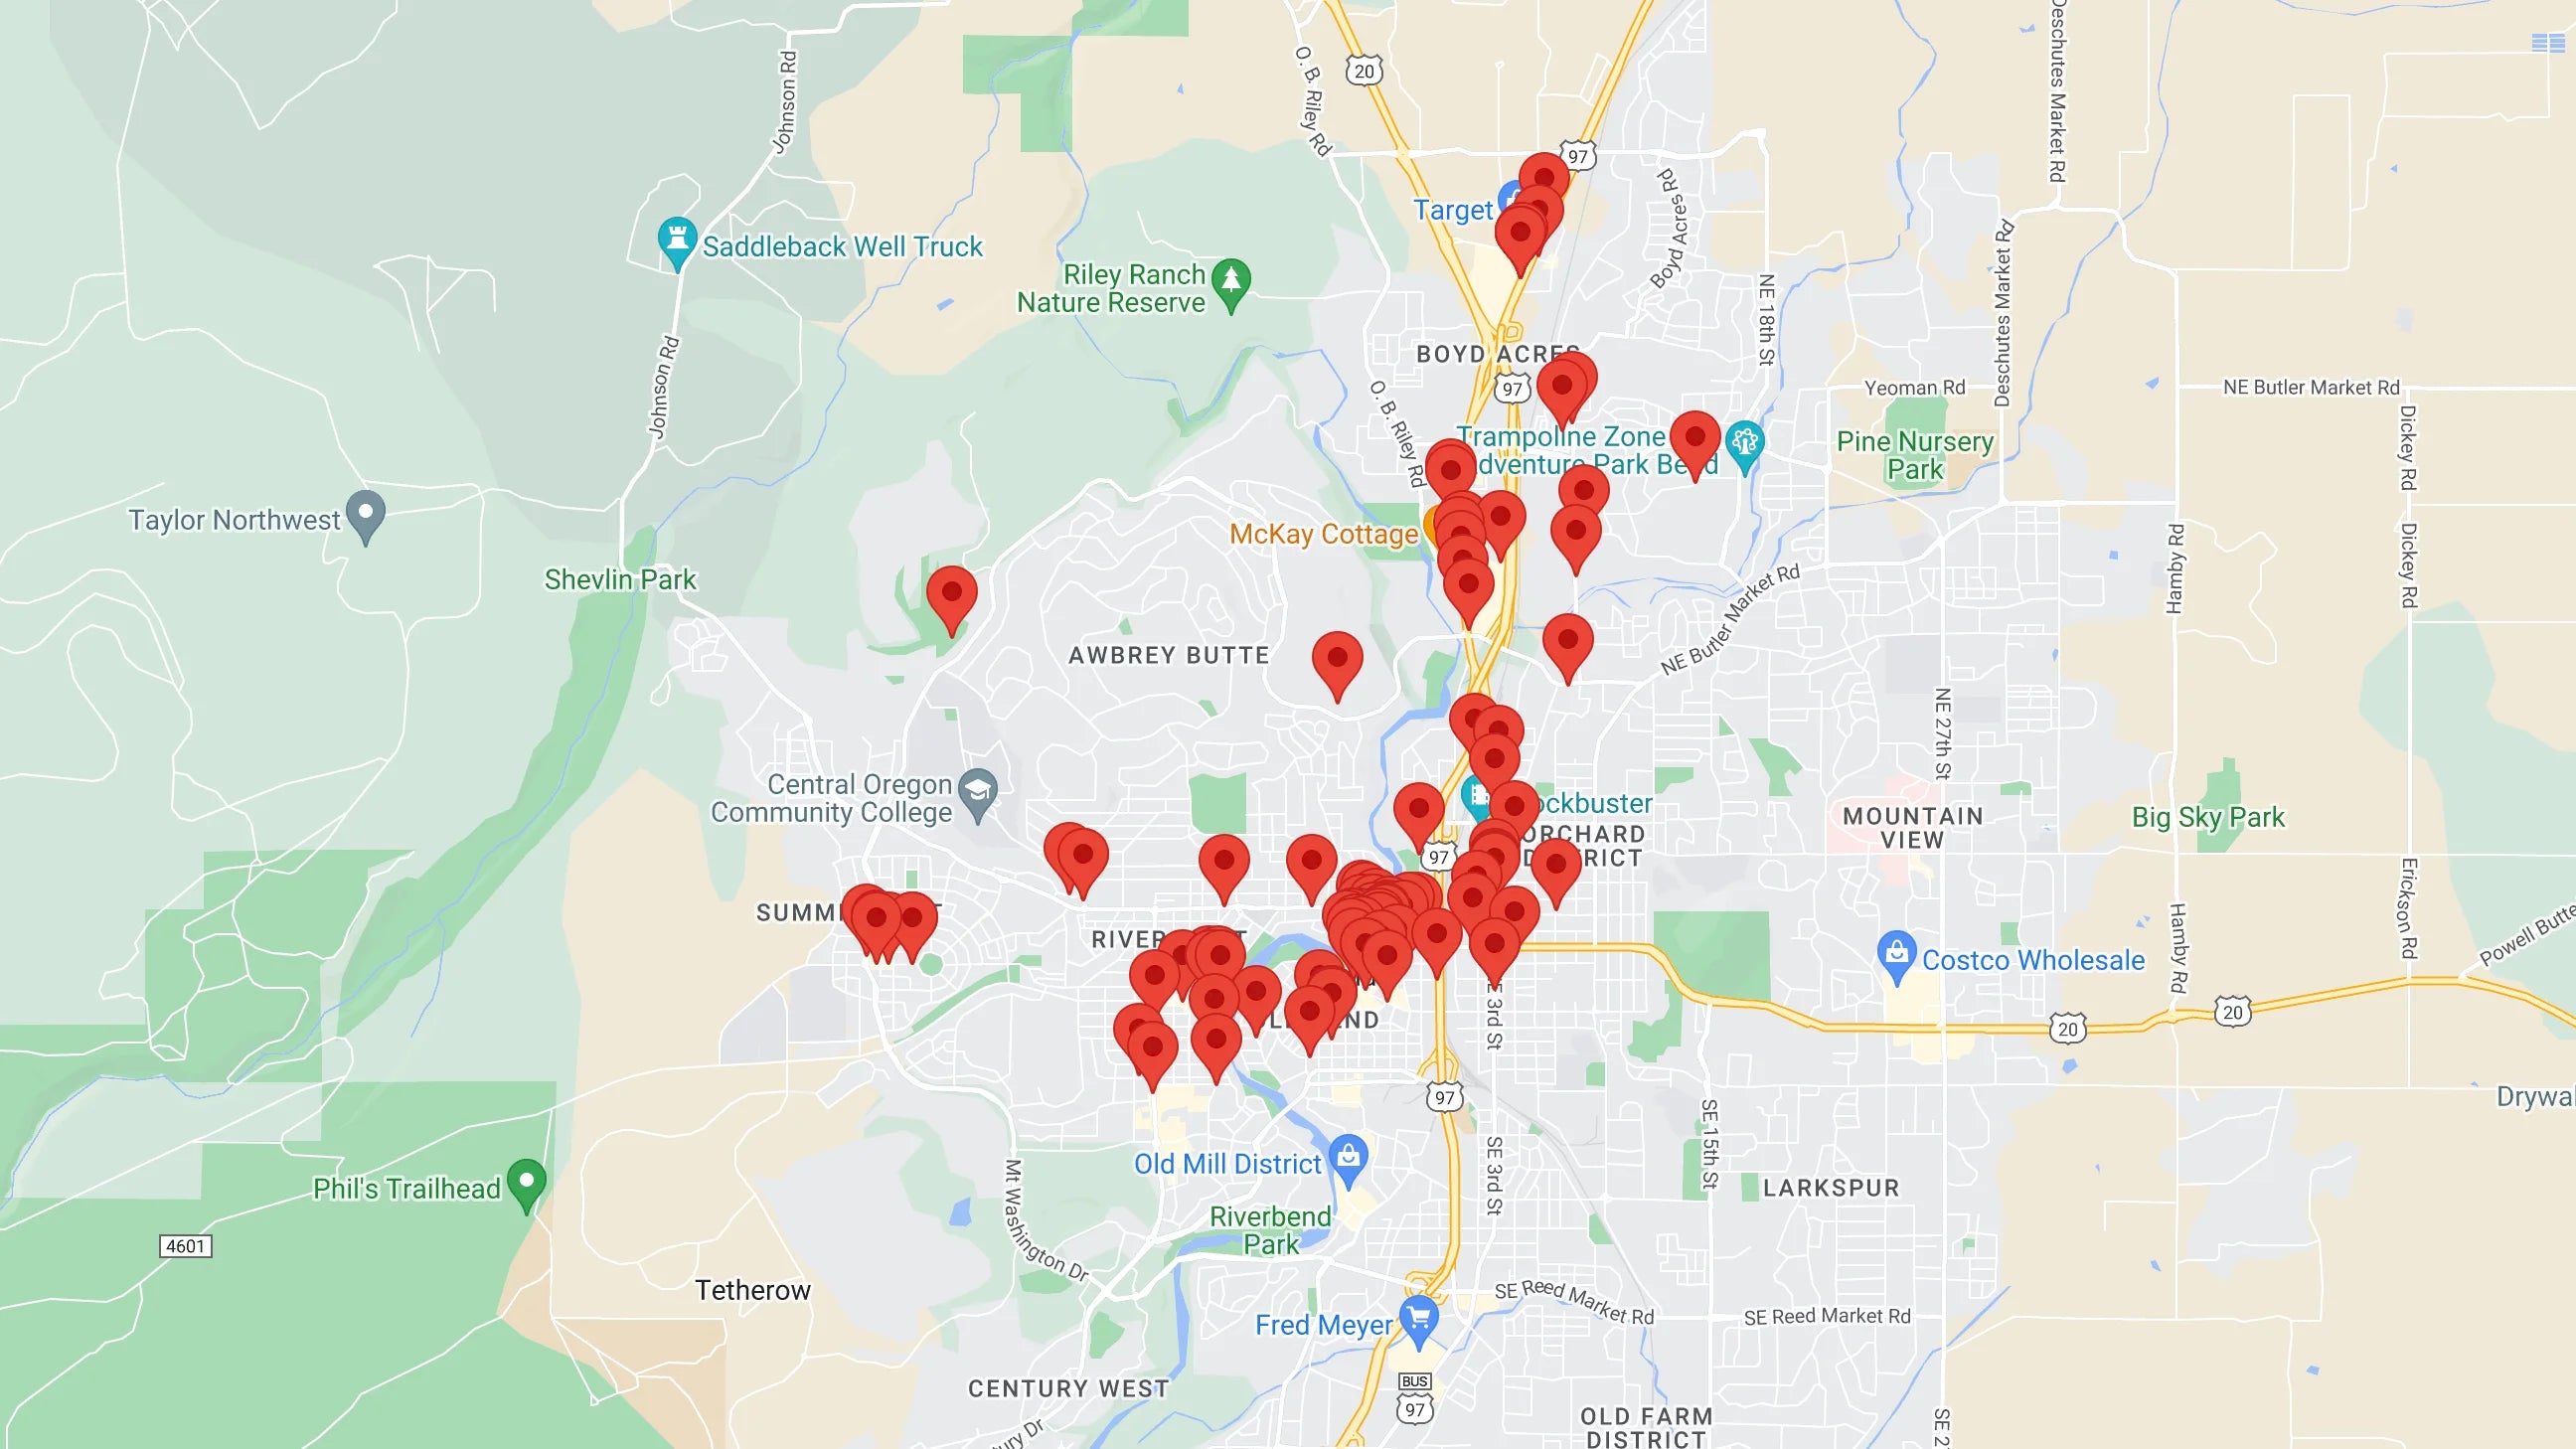 A screenshot of Bend, Oregon in the Google Maps interface.